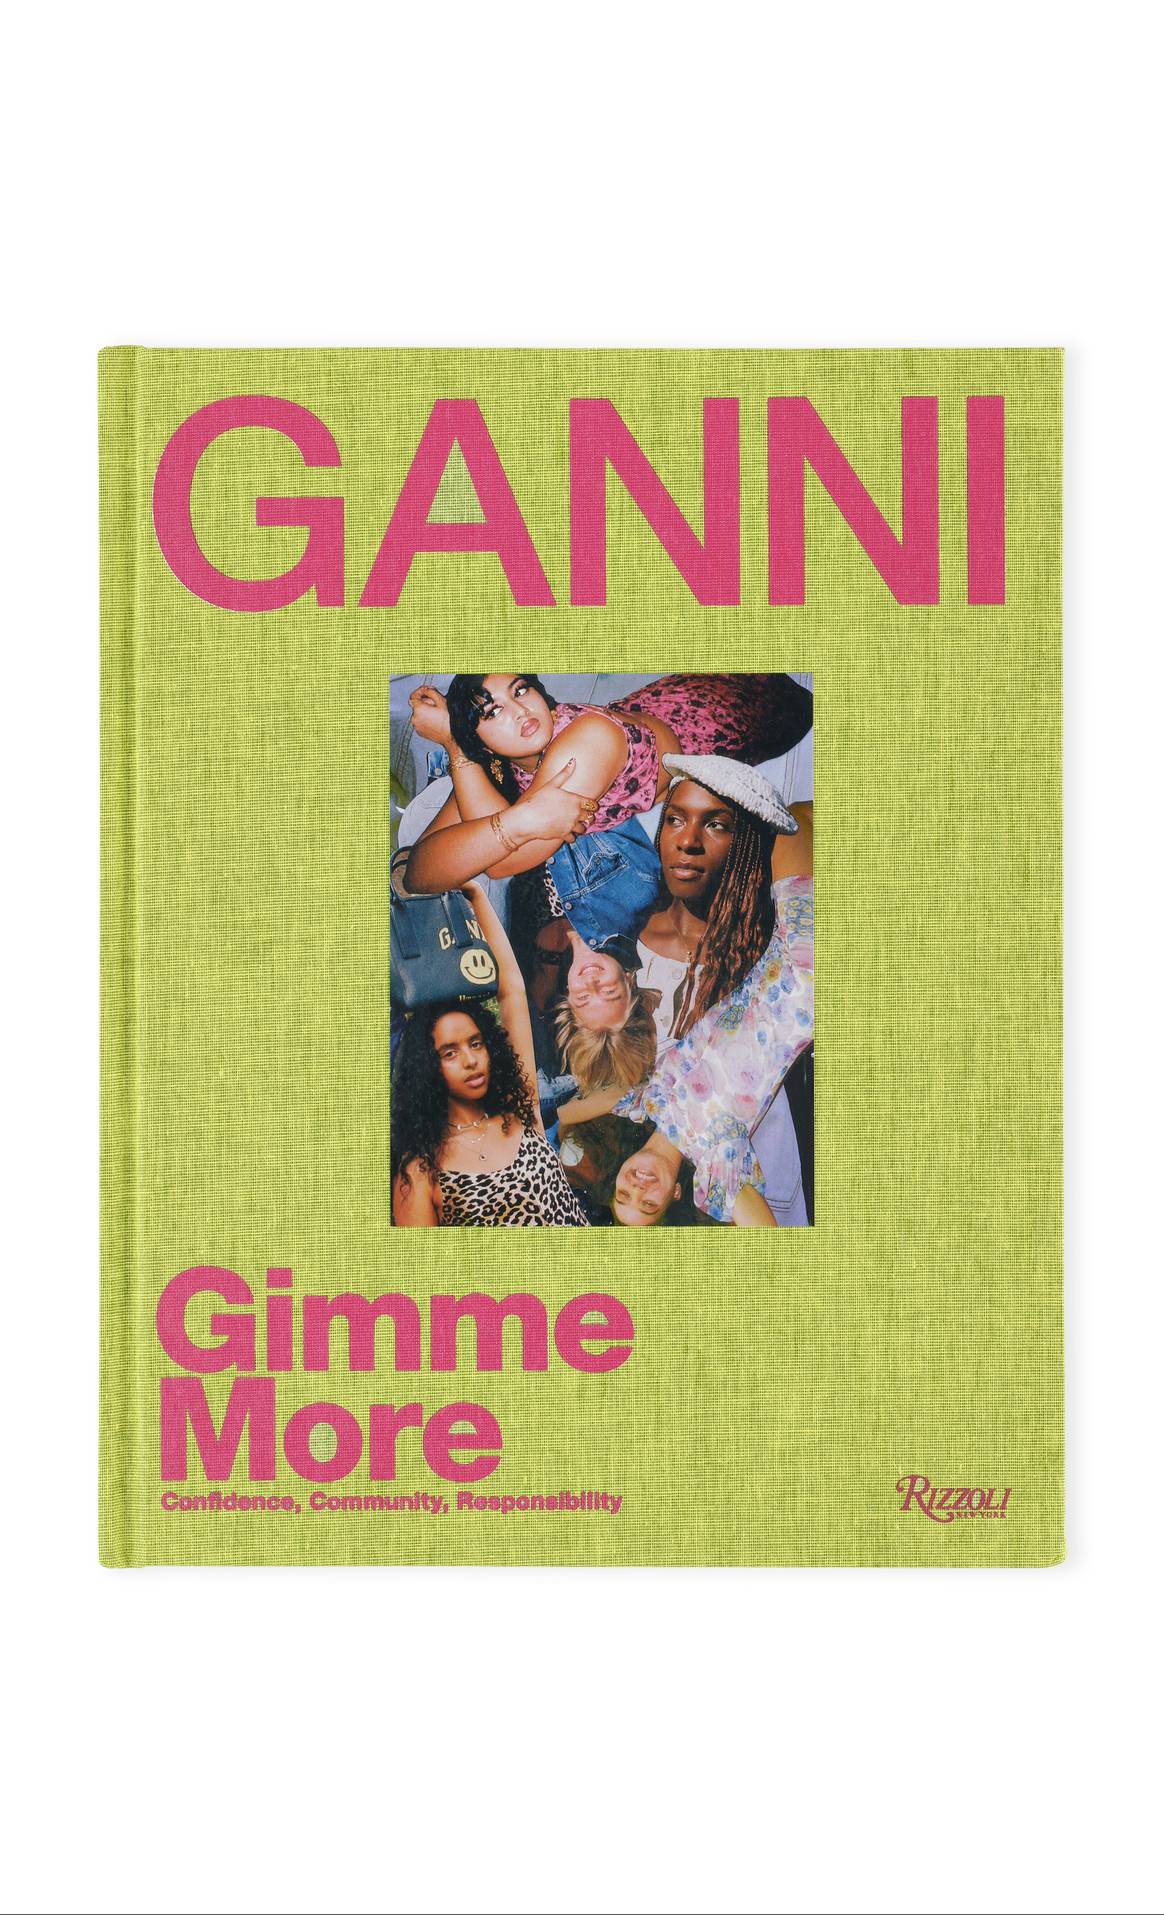 Image: GANNI: Gimme More by Ganni © Rizzoli New York, 2021